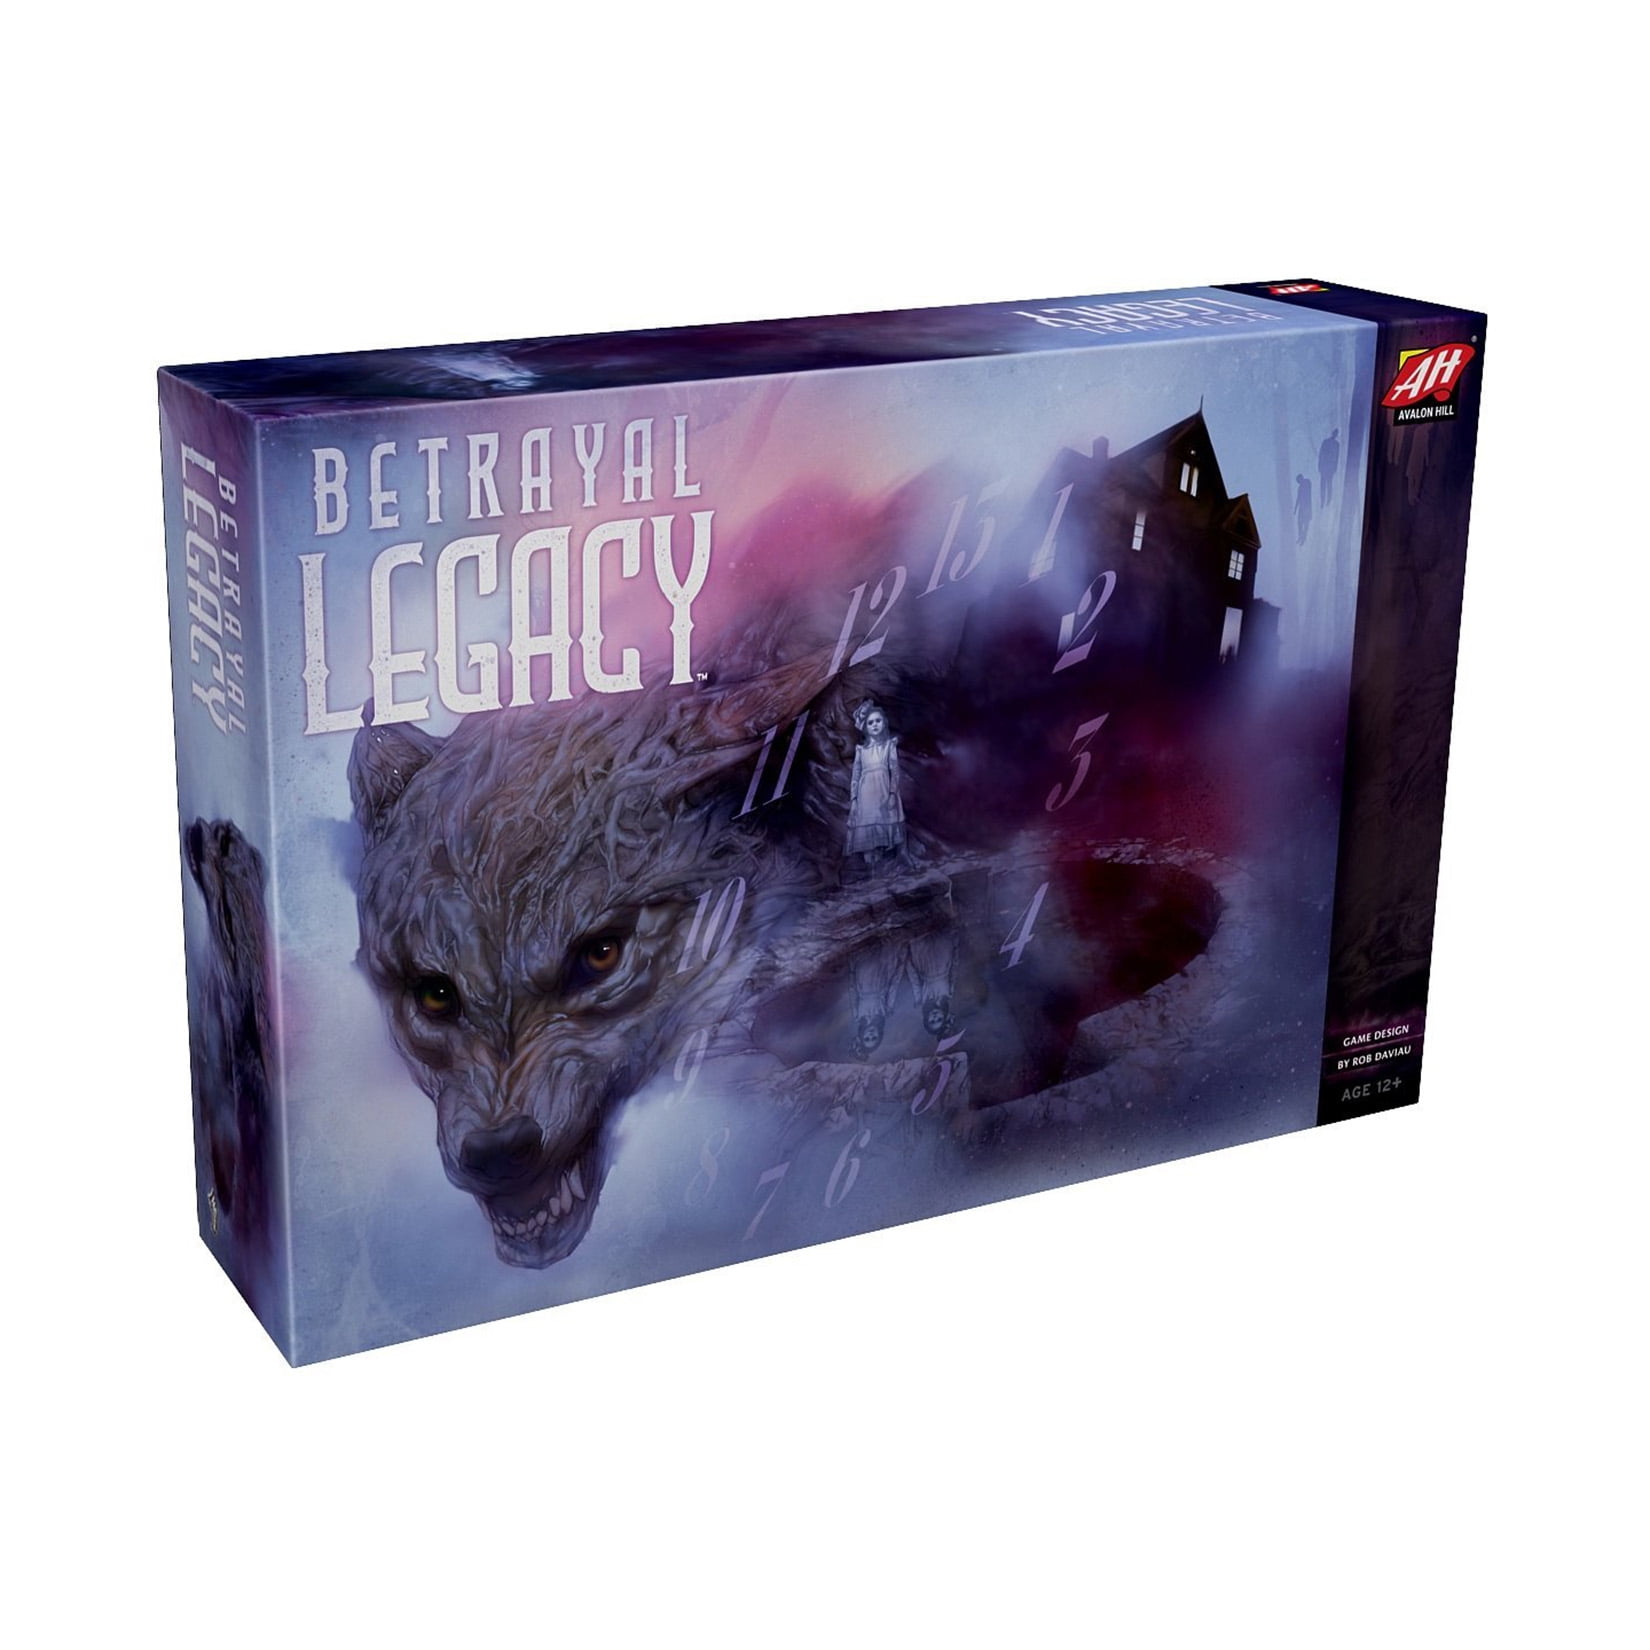 BETRAYAL LEGACY BOARD GAME NEW SEALED AVALON HILL